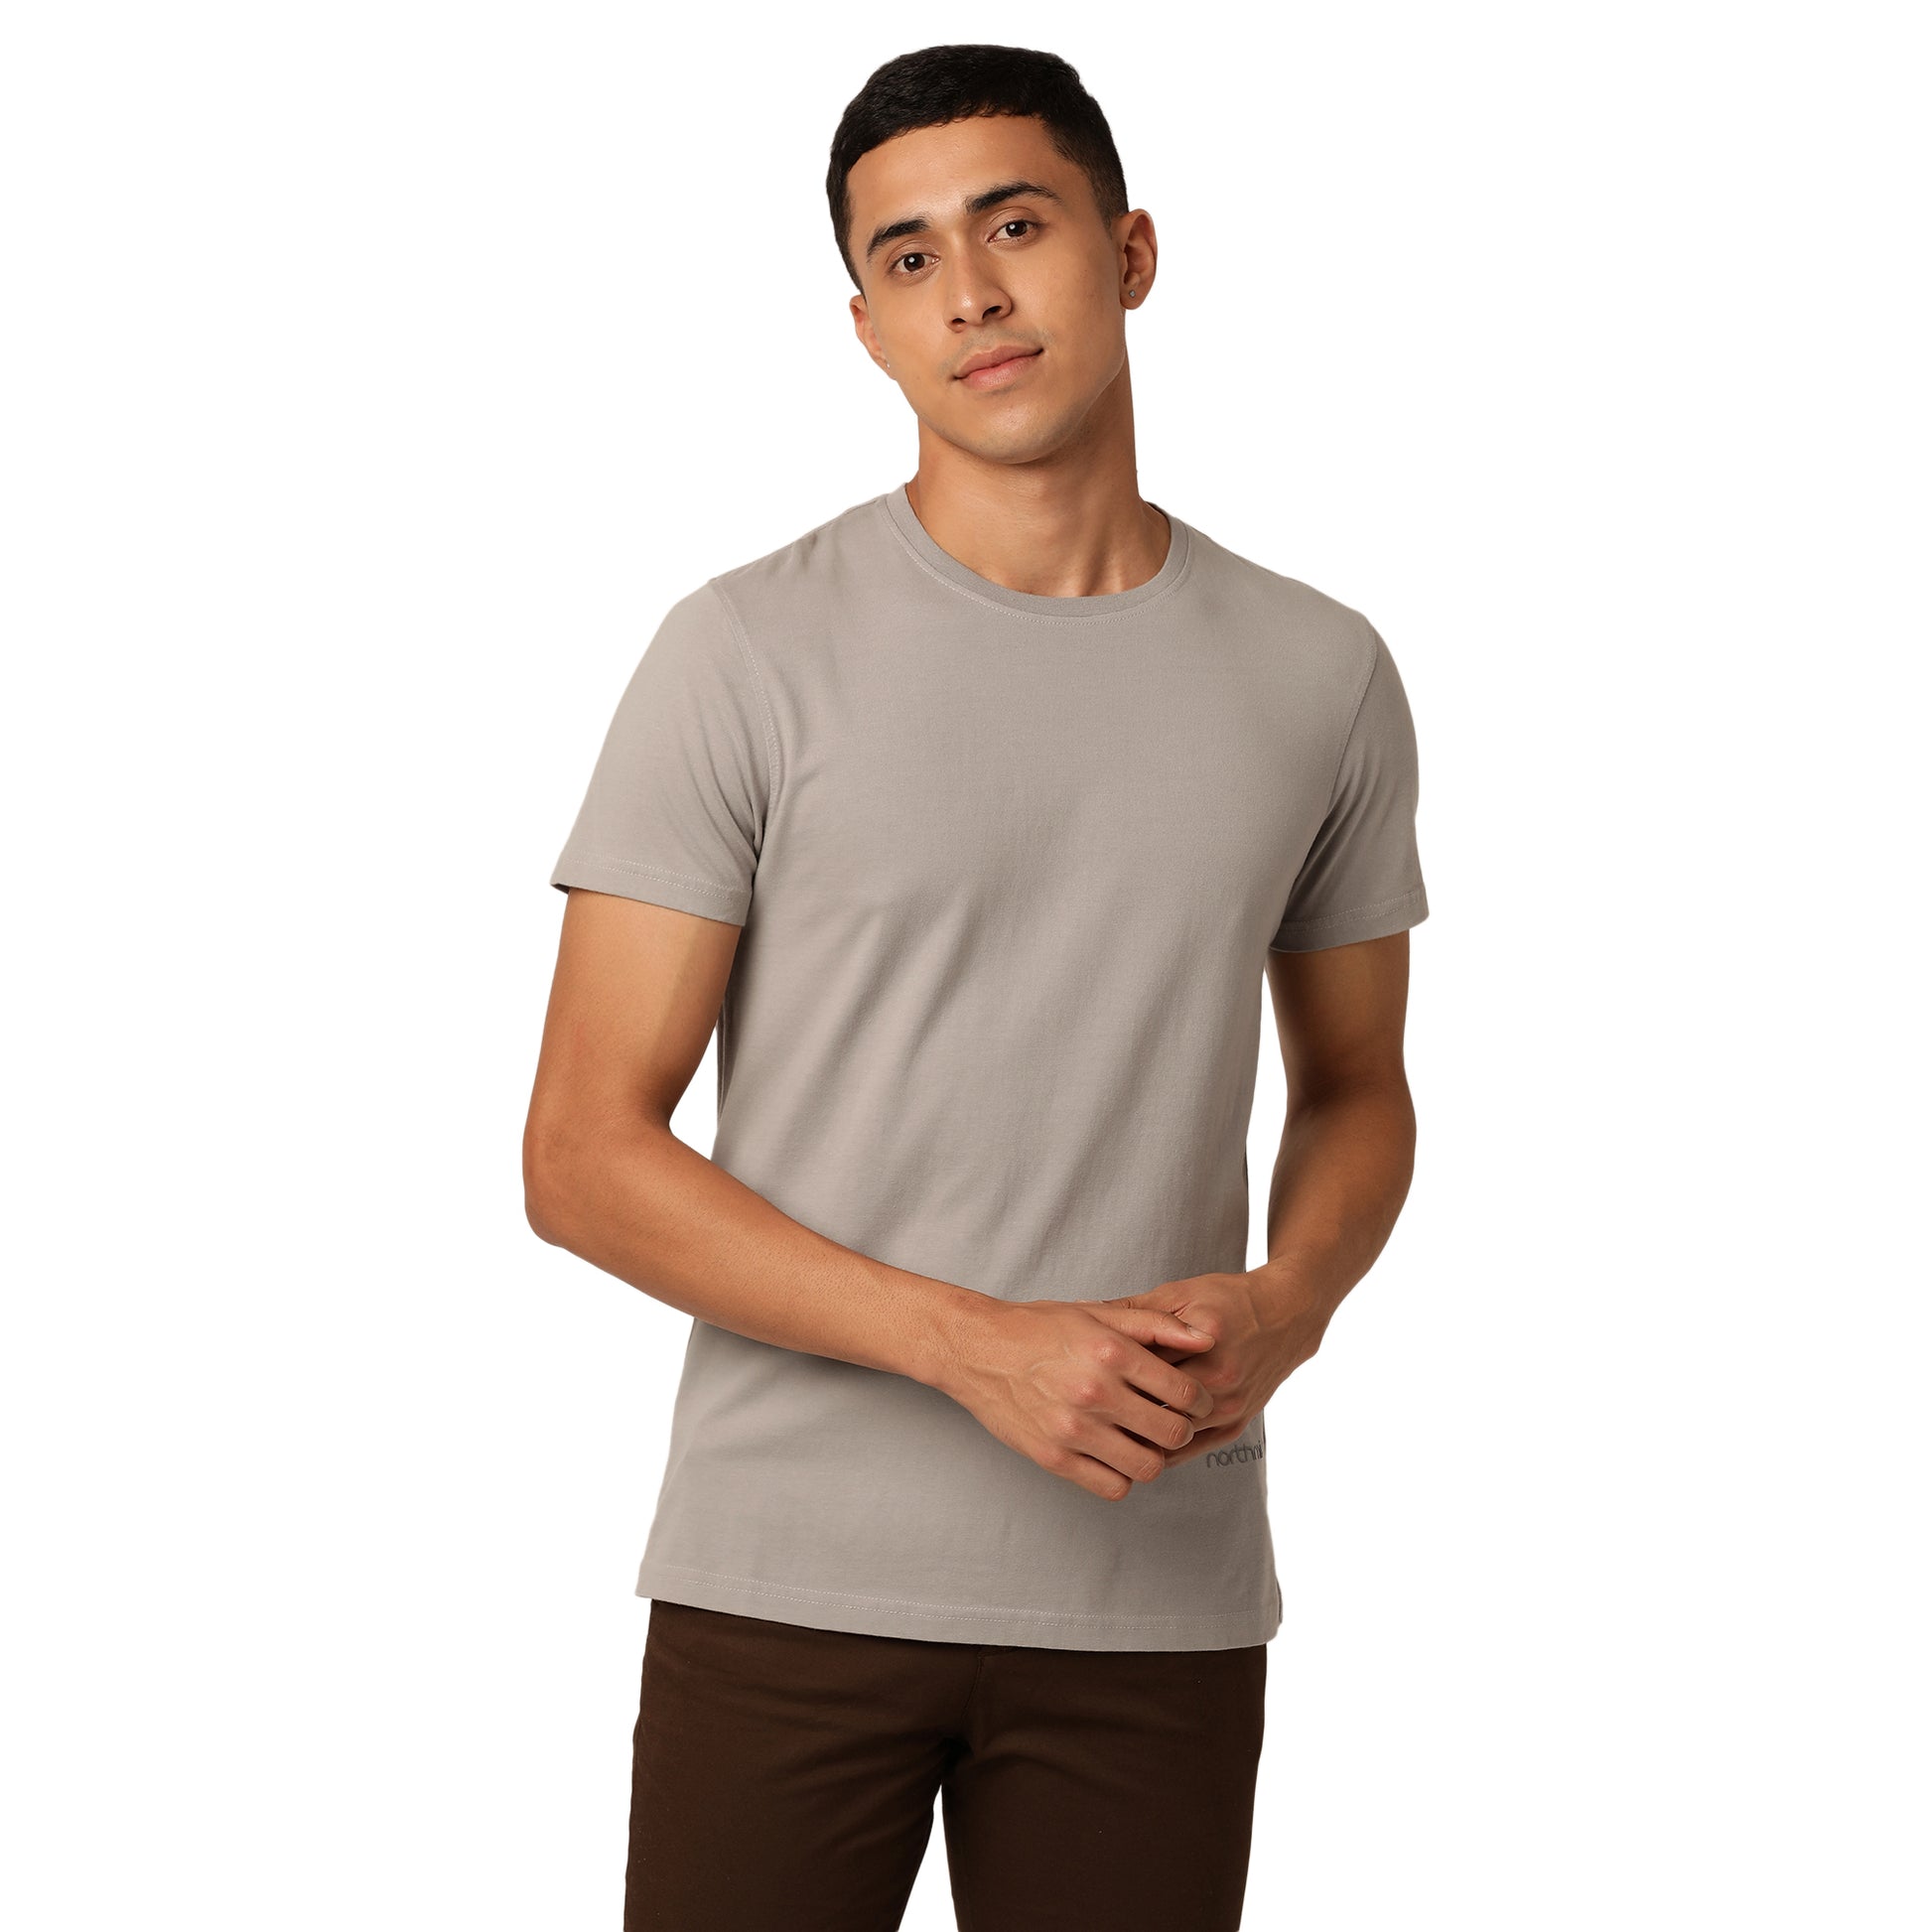 A person with short black hair, wearing a stylish light grey Amity Combo Pack: Organic Crew Neck T-shirt - Grey and Mustard by Northmist and dark brown pants, stands against a plain white background. They have a neutral expression, and their hands are clasped in front of them.